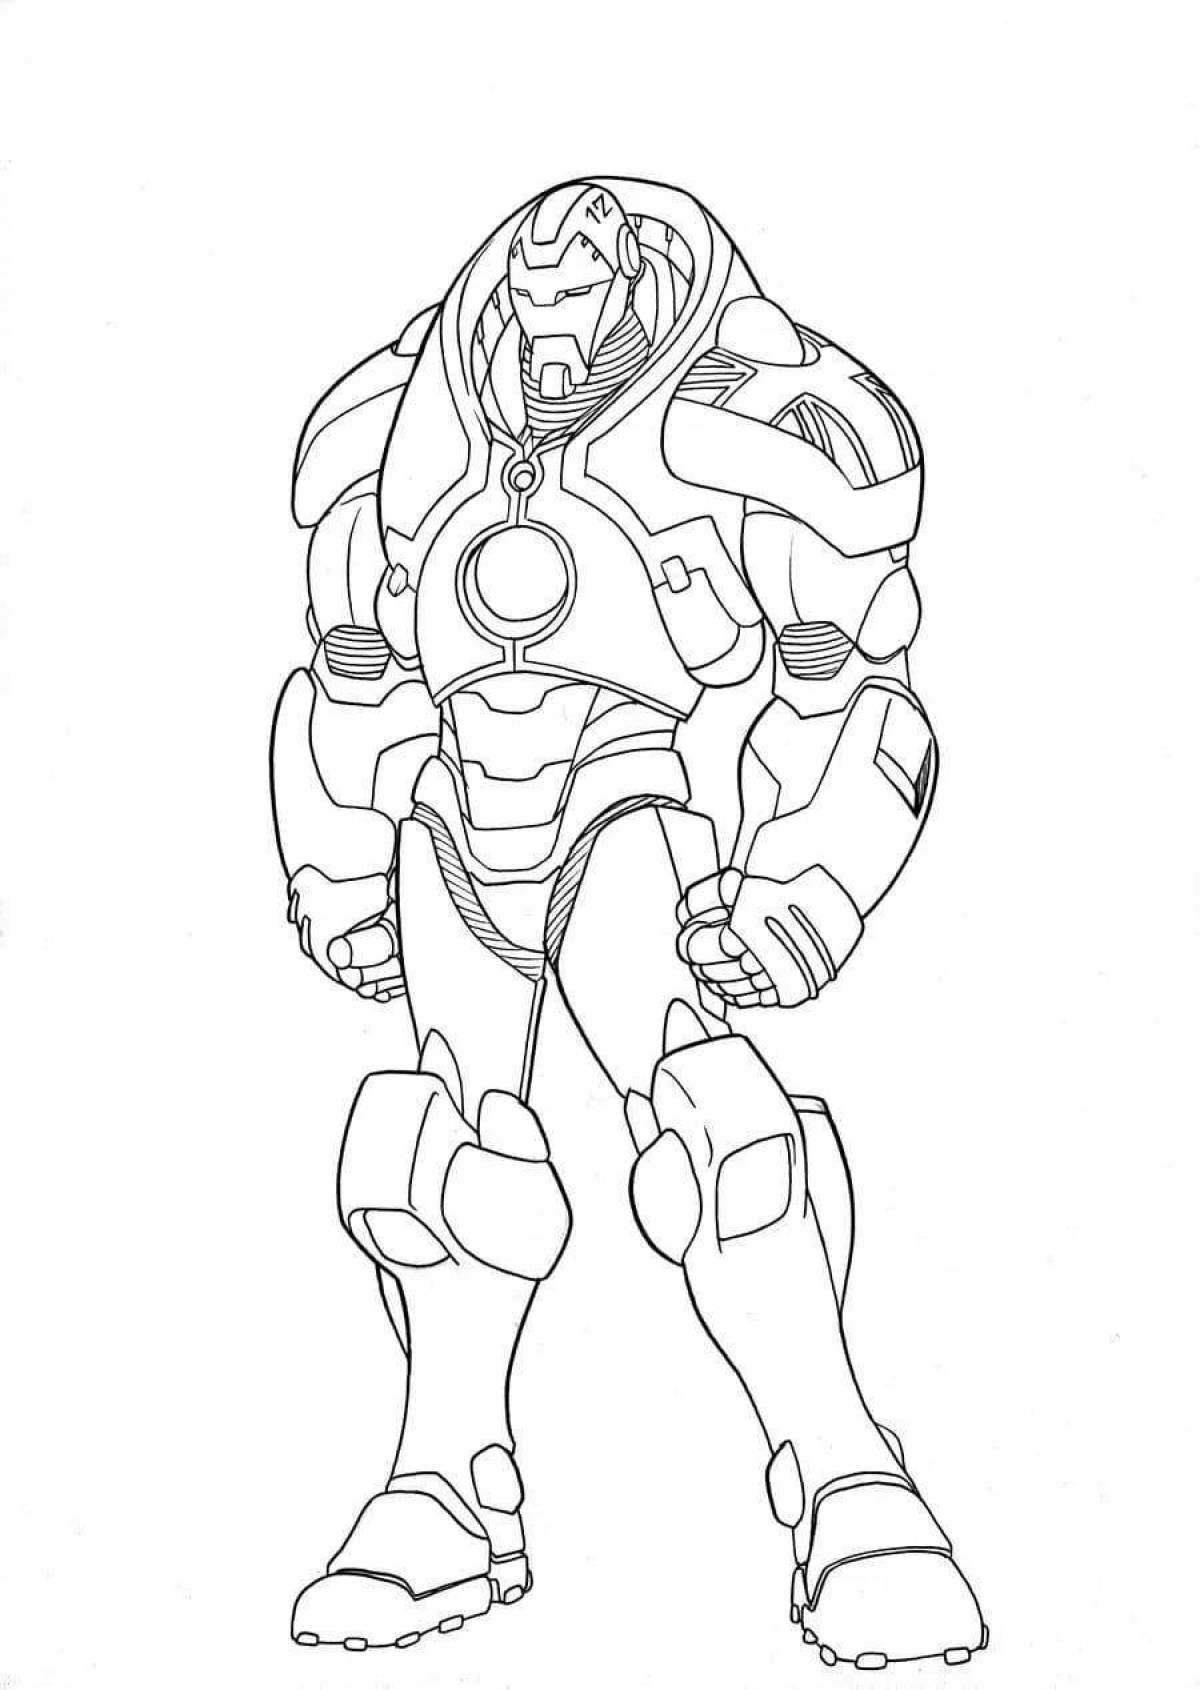 Amazing iron man coloring book for kids